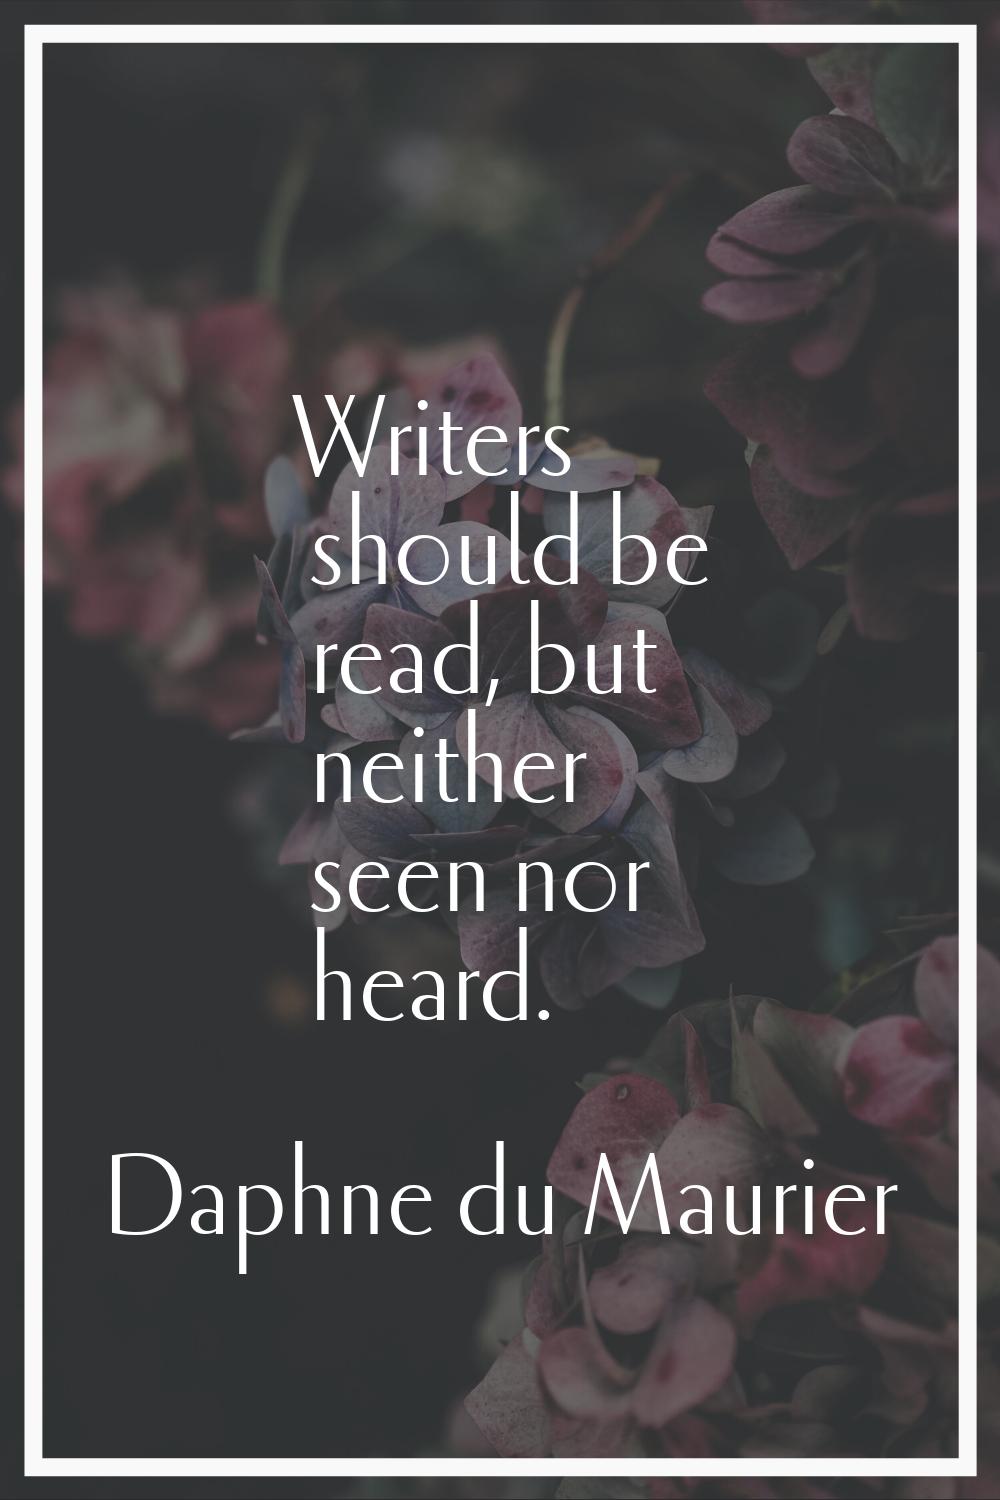 Writers should be read, but neither seen nor heard.